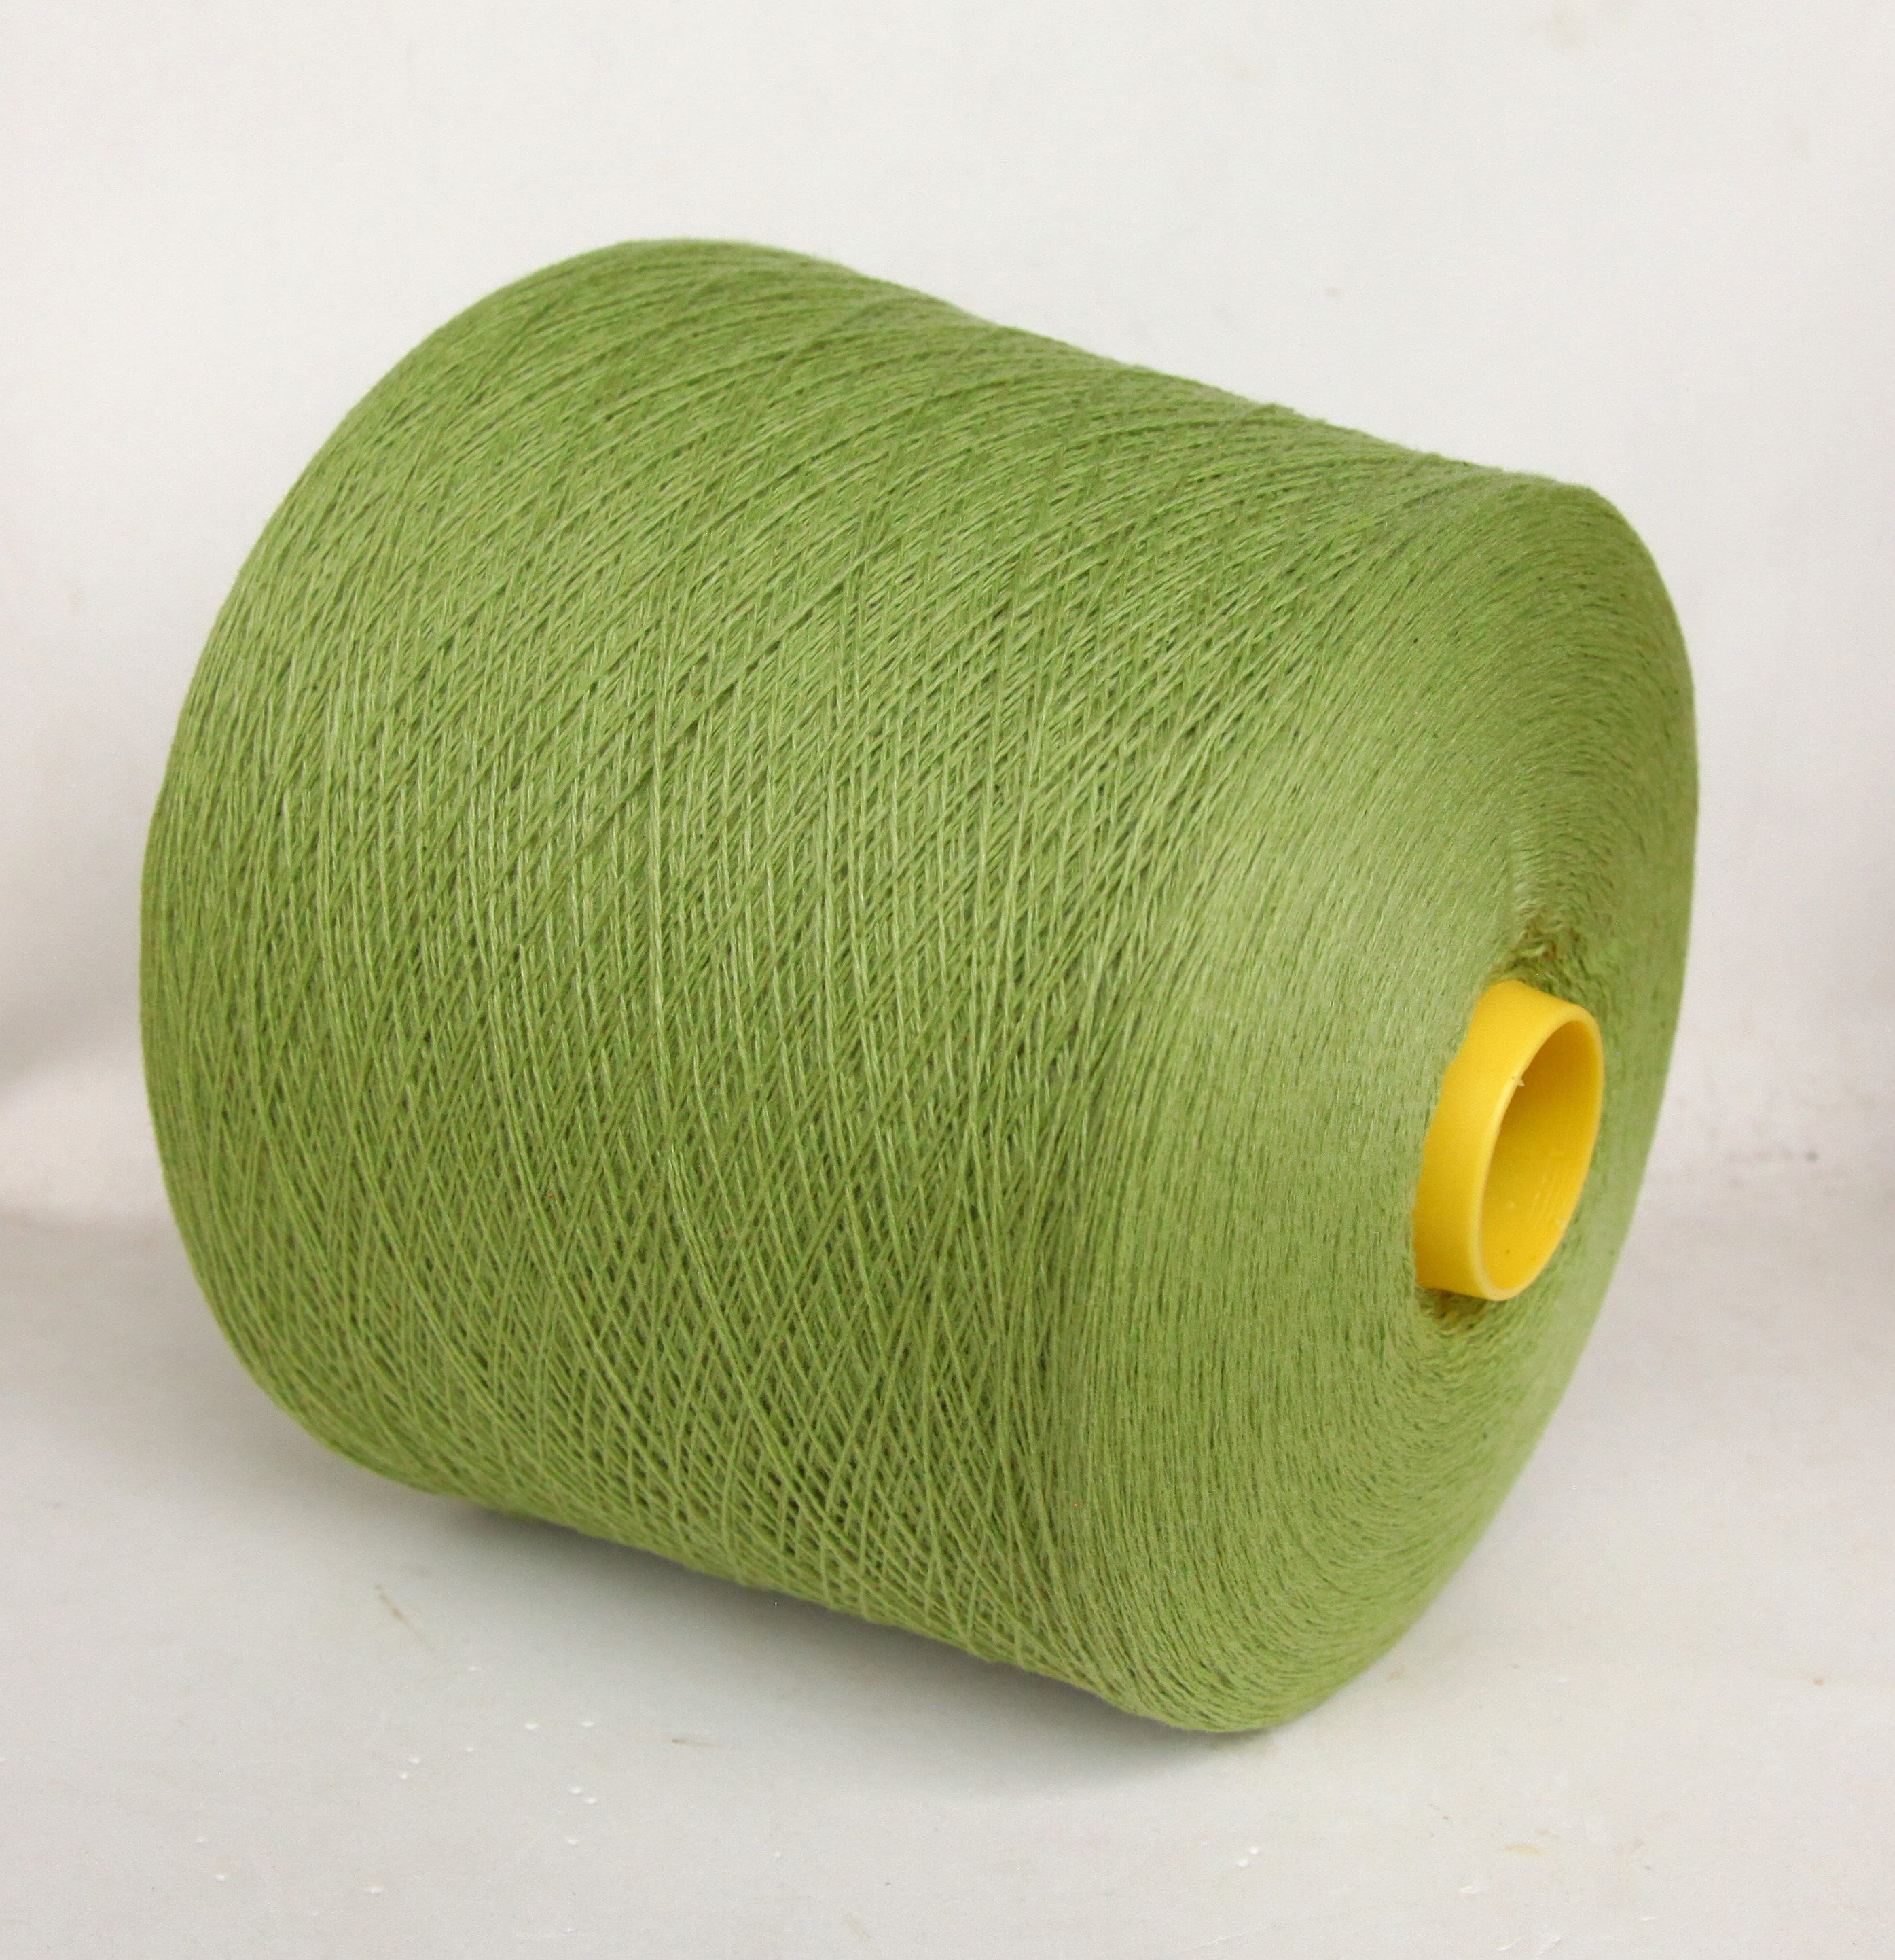 100% cashmere yarn on cone, pure cashmere yarn, lace weight yarn for  knitting, weaving and crochet, per 100g